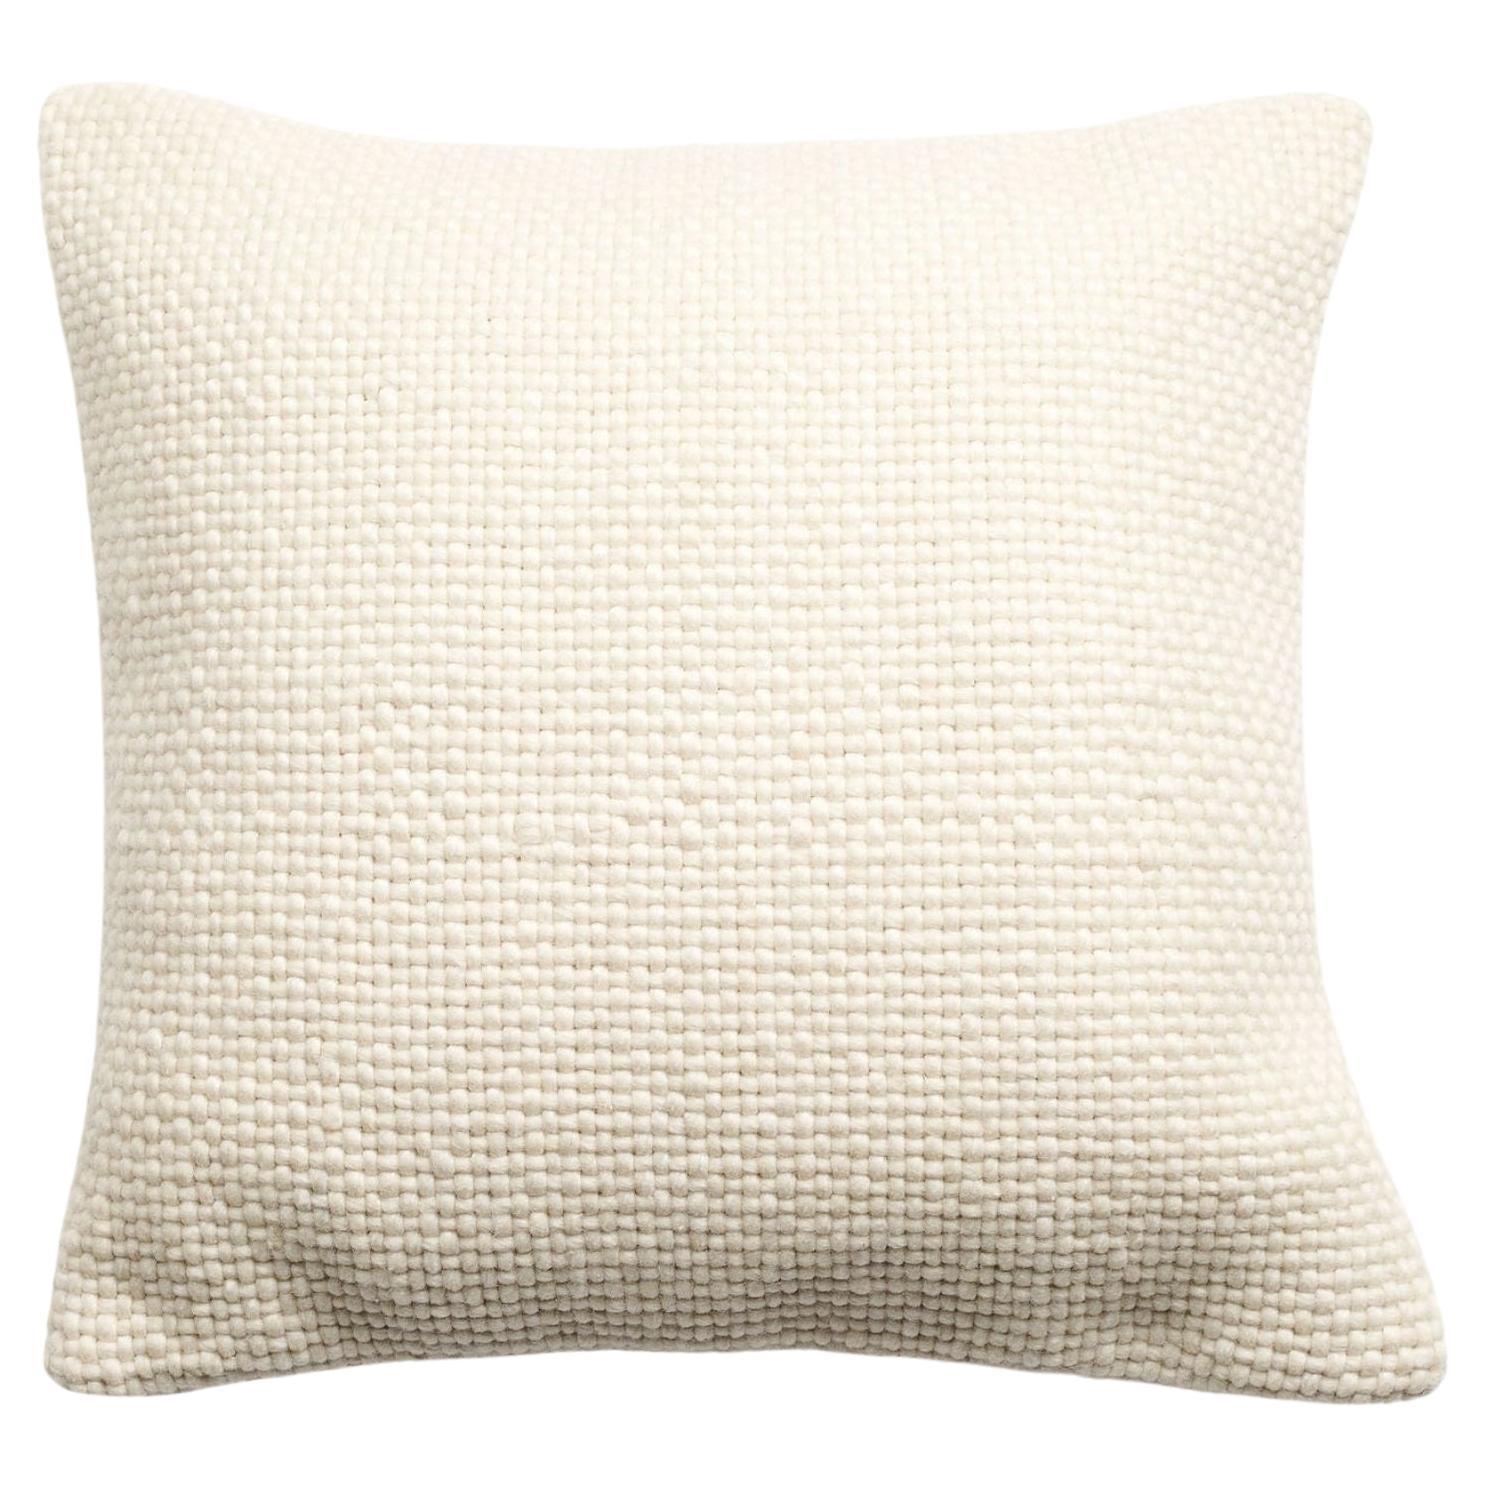 Cloud White Handwoven Merino Pillow In Classic Basket Weave Pattern By Artisans 